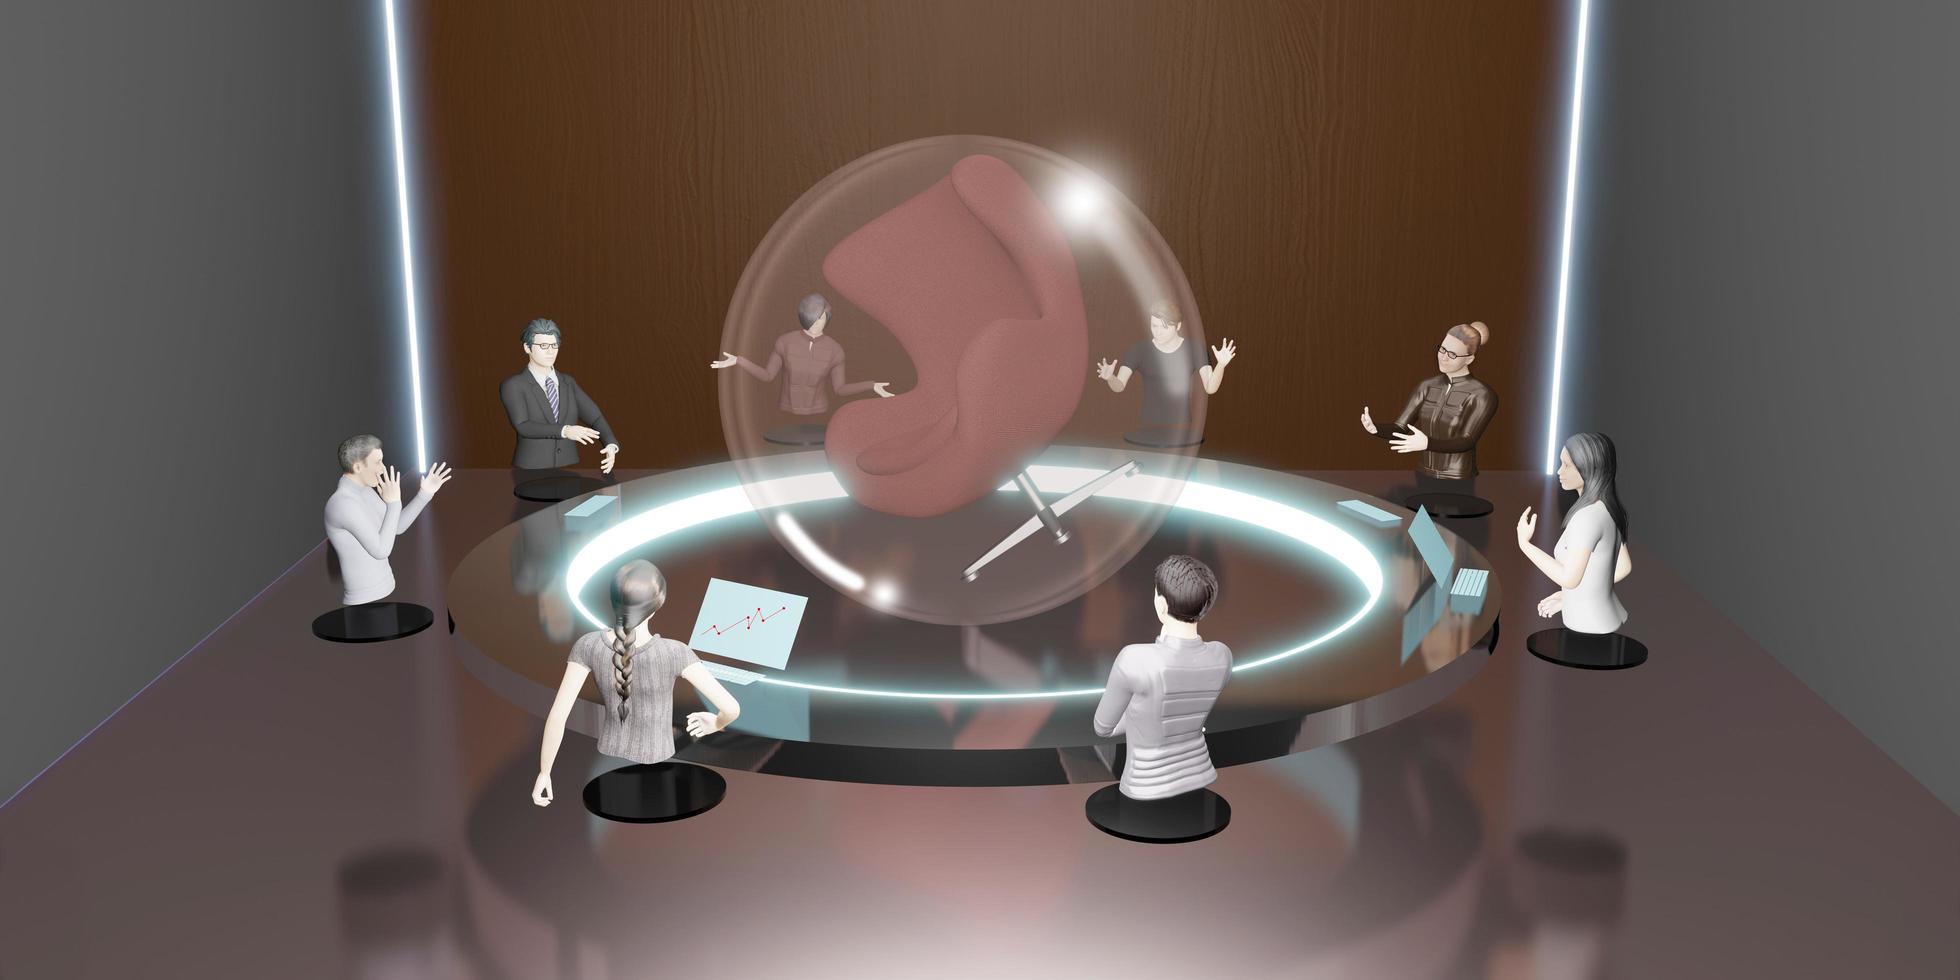 Online classes online seminars online meeting Avatars in the office and classroom People in Metaverse 3D illustration photo